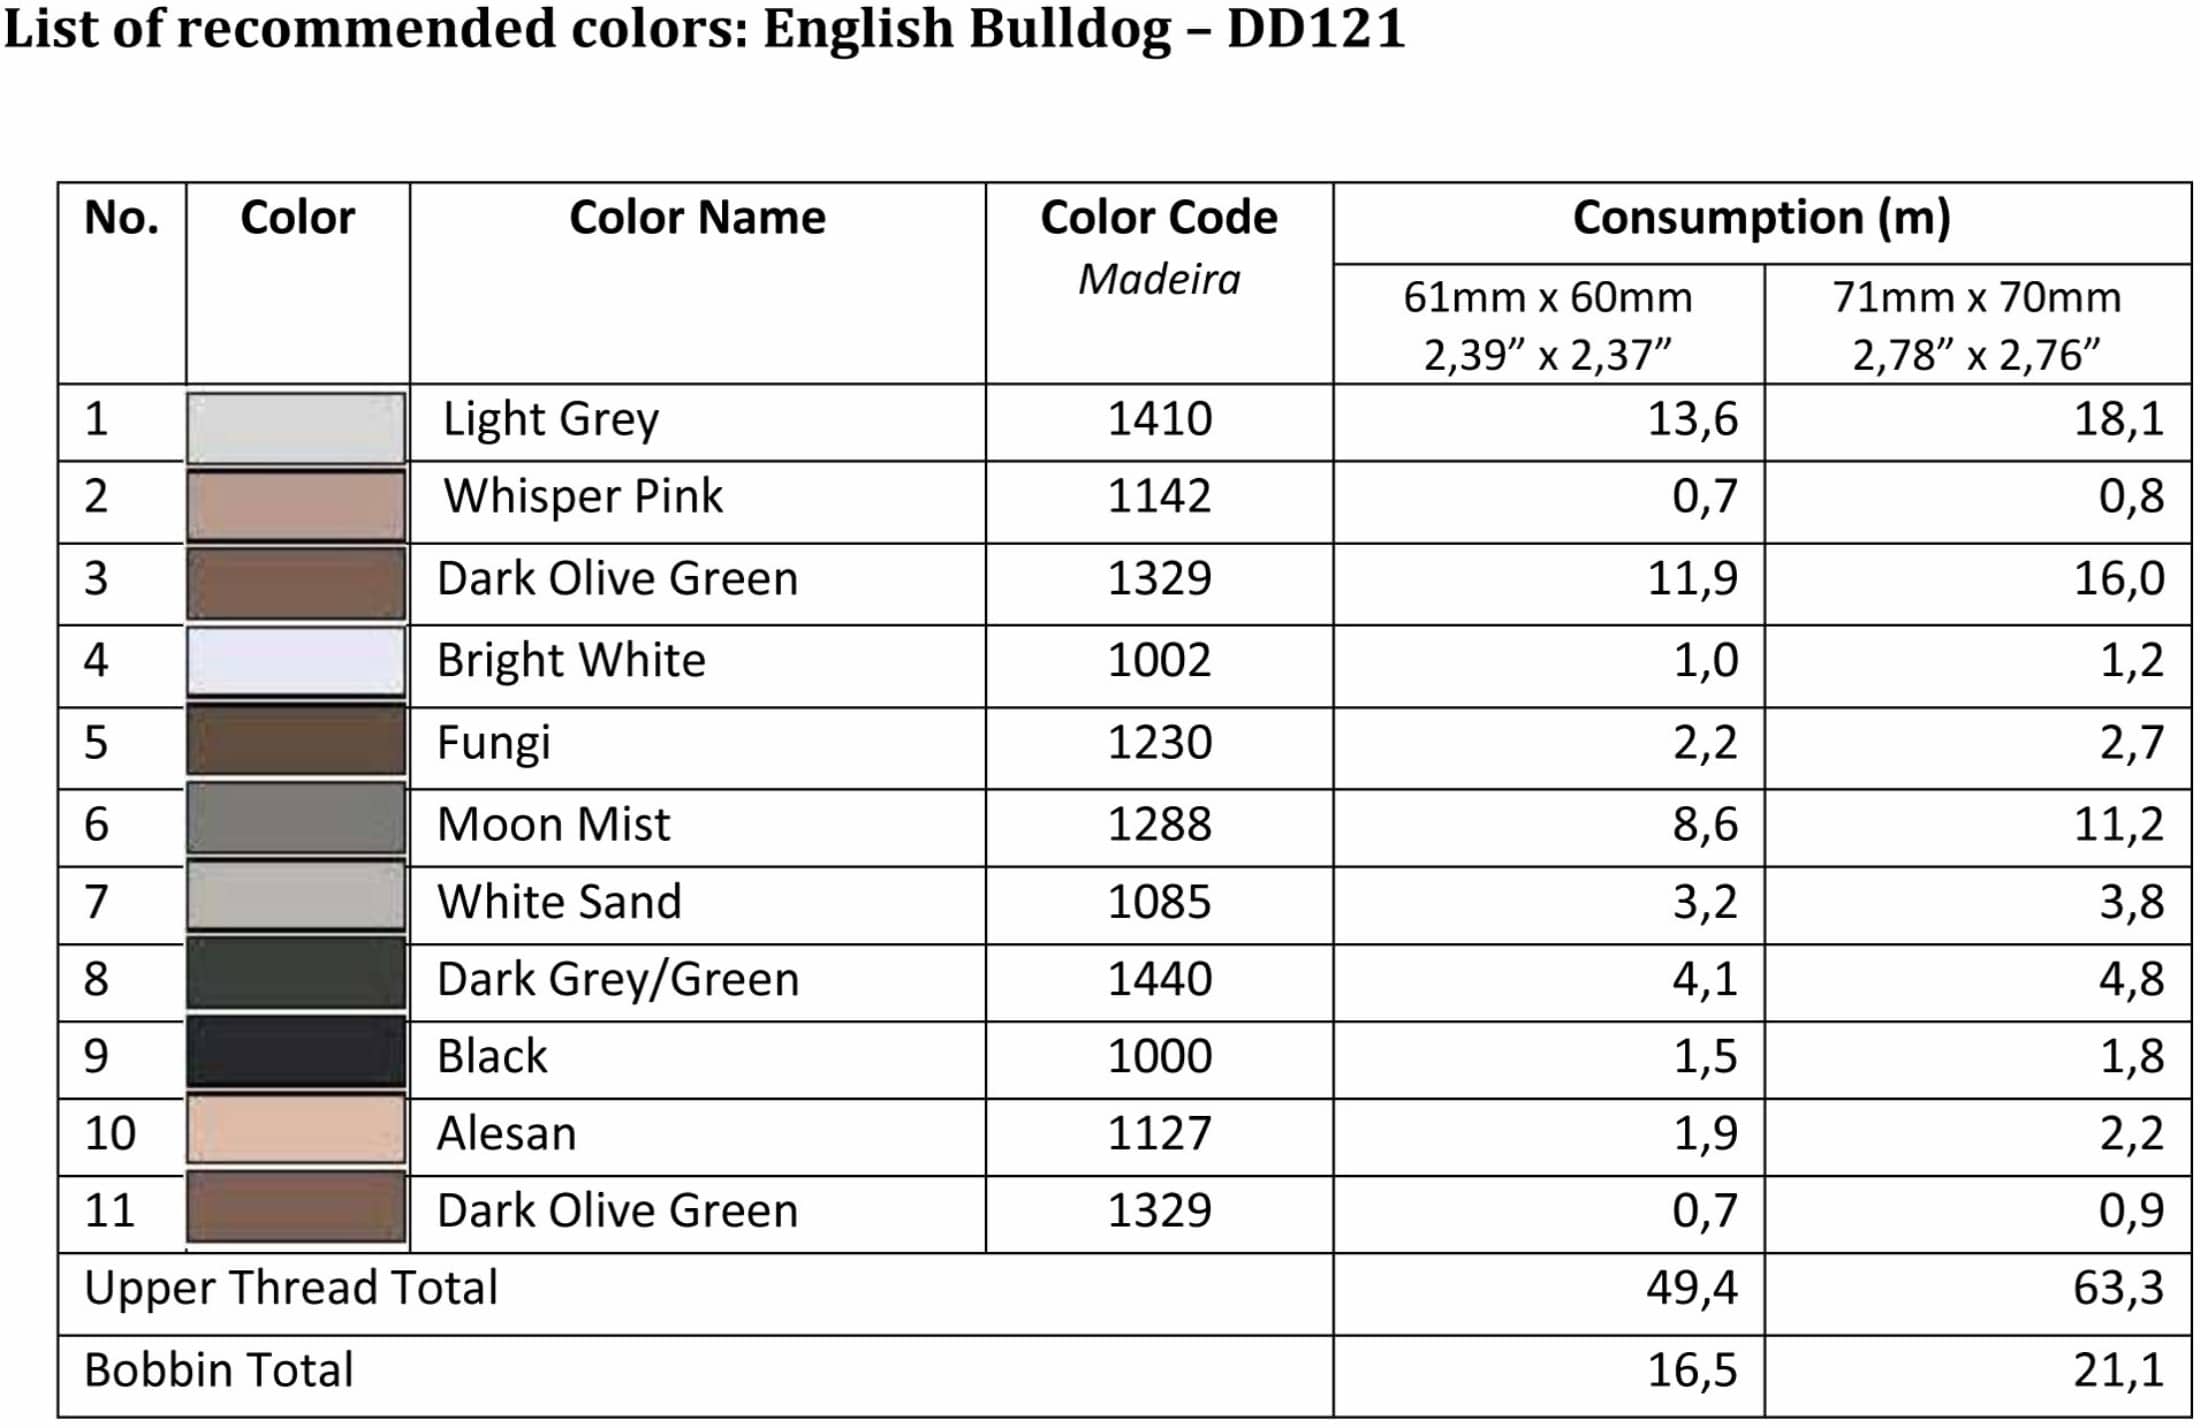 List of Recommended Colors - English Bulldog DD121